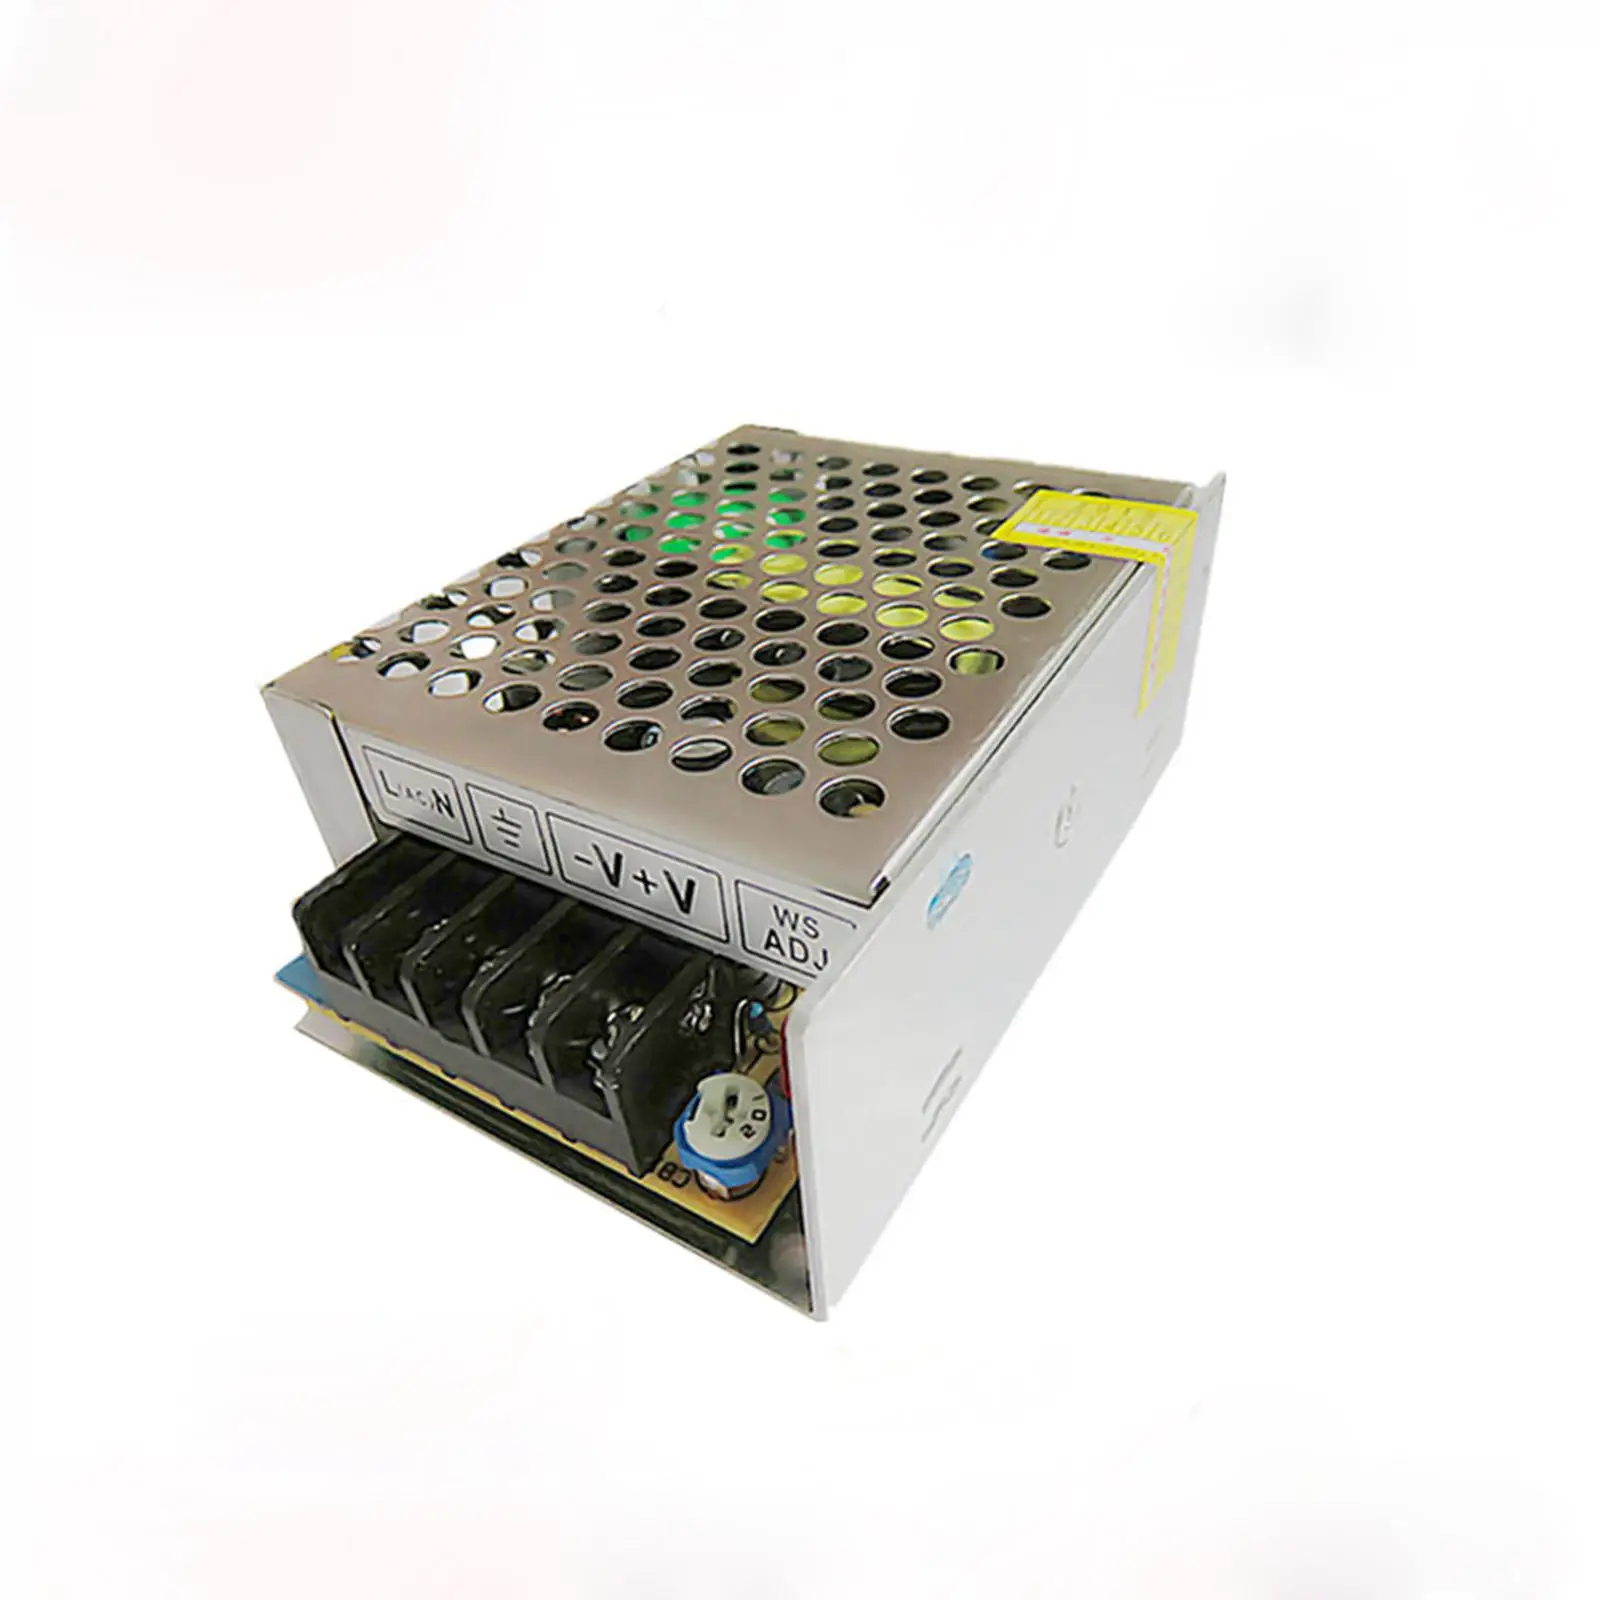 

60W 4A 15VDC Output 110/220VAC Input LED Drive Switching Power Supply Regulated Source Transformer AC DC Display